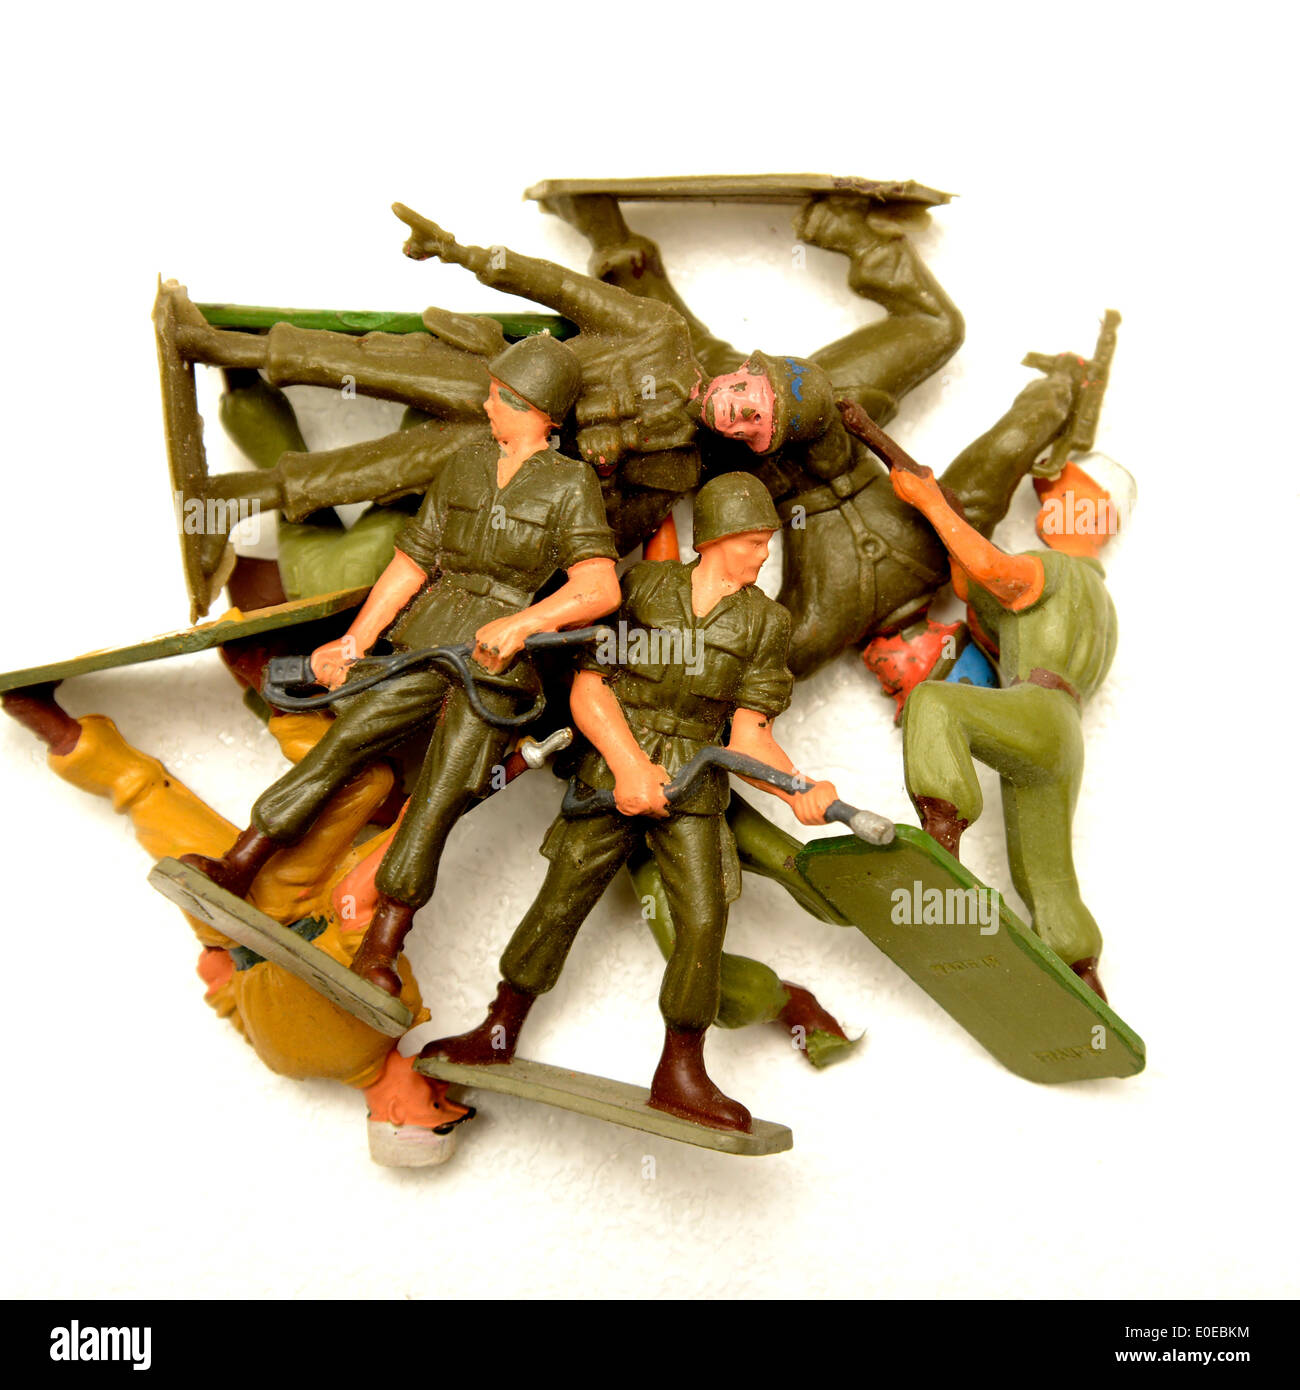 Toy soldier figurines Stock Photo